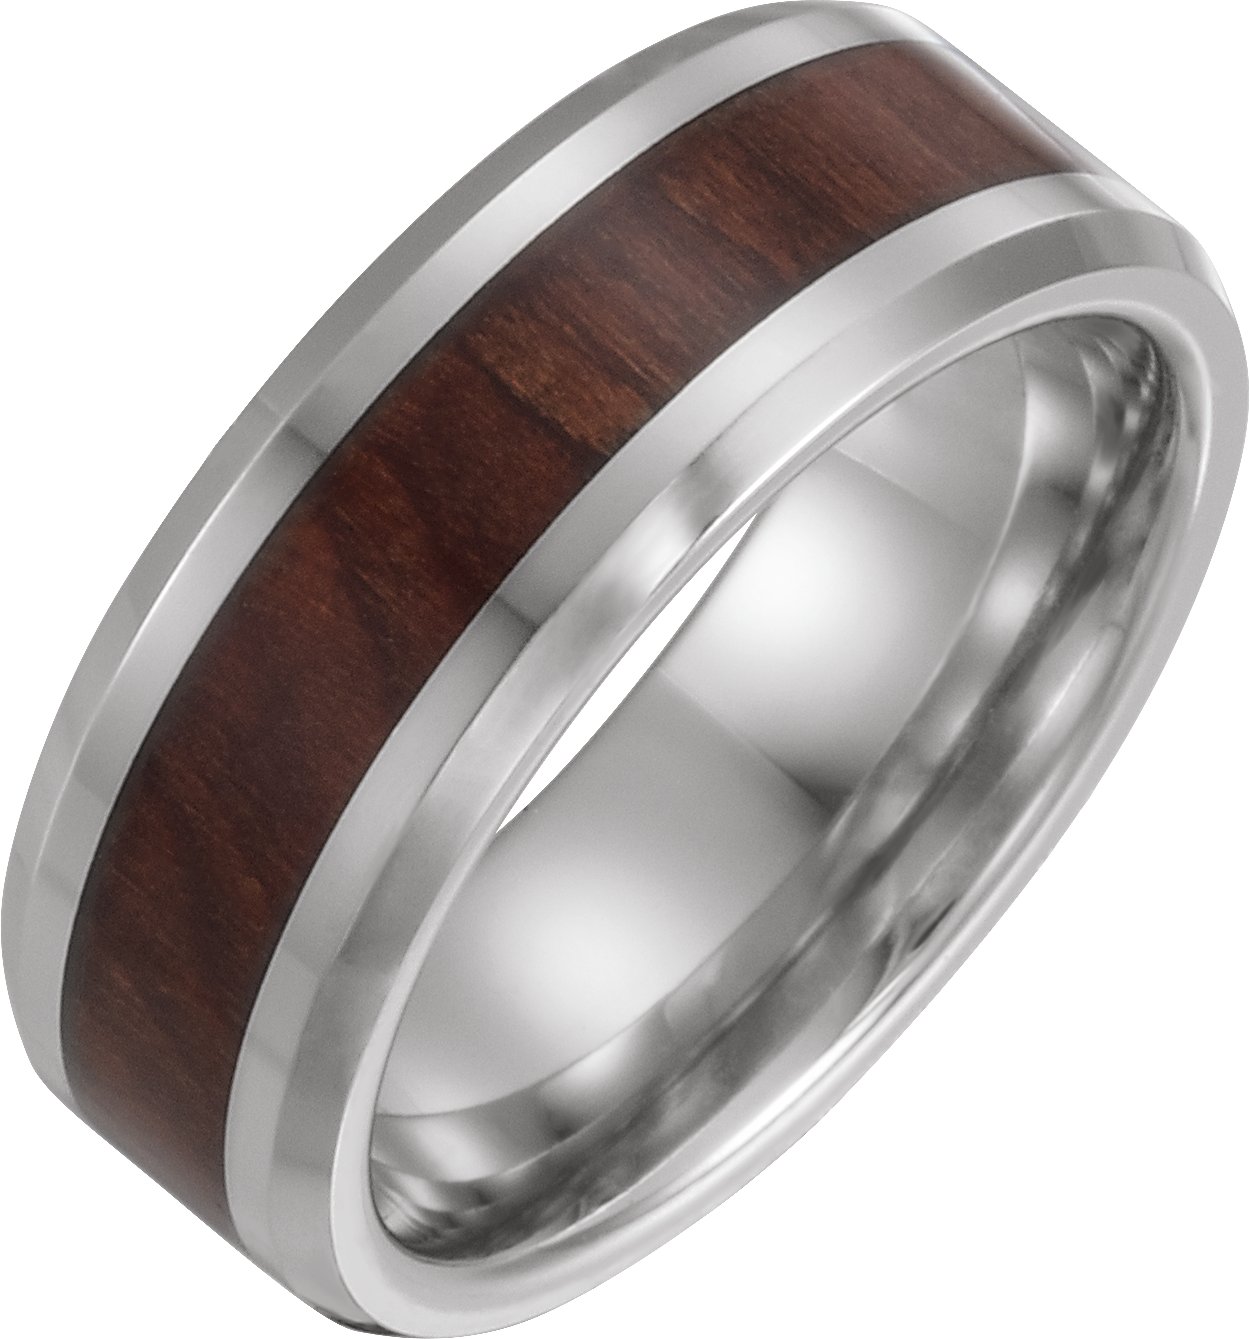 Cobalt 8 mm Beveled Edge Band with Wood Inlay Size 13.5 Ref 16120552